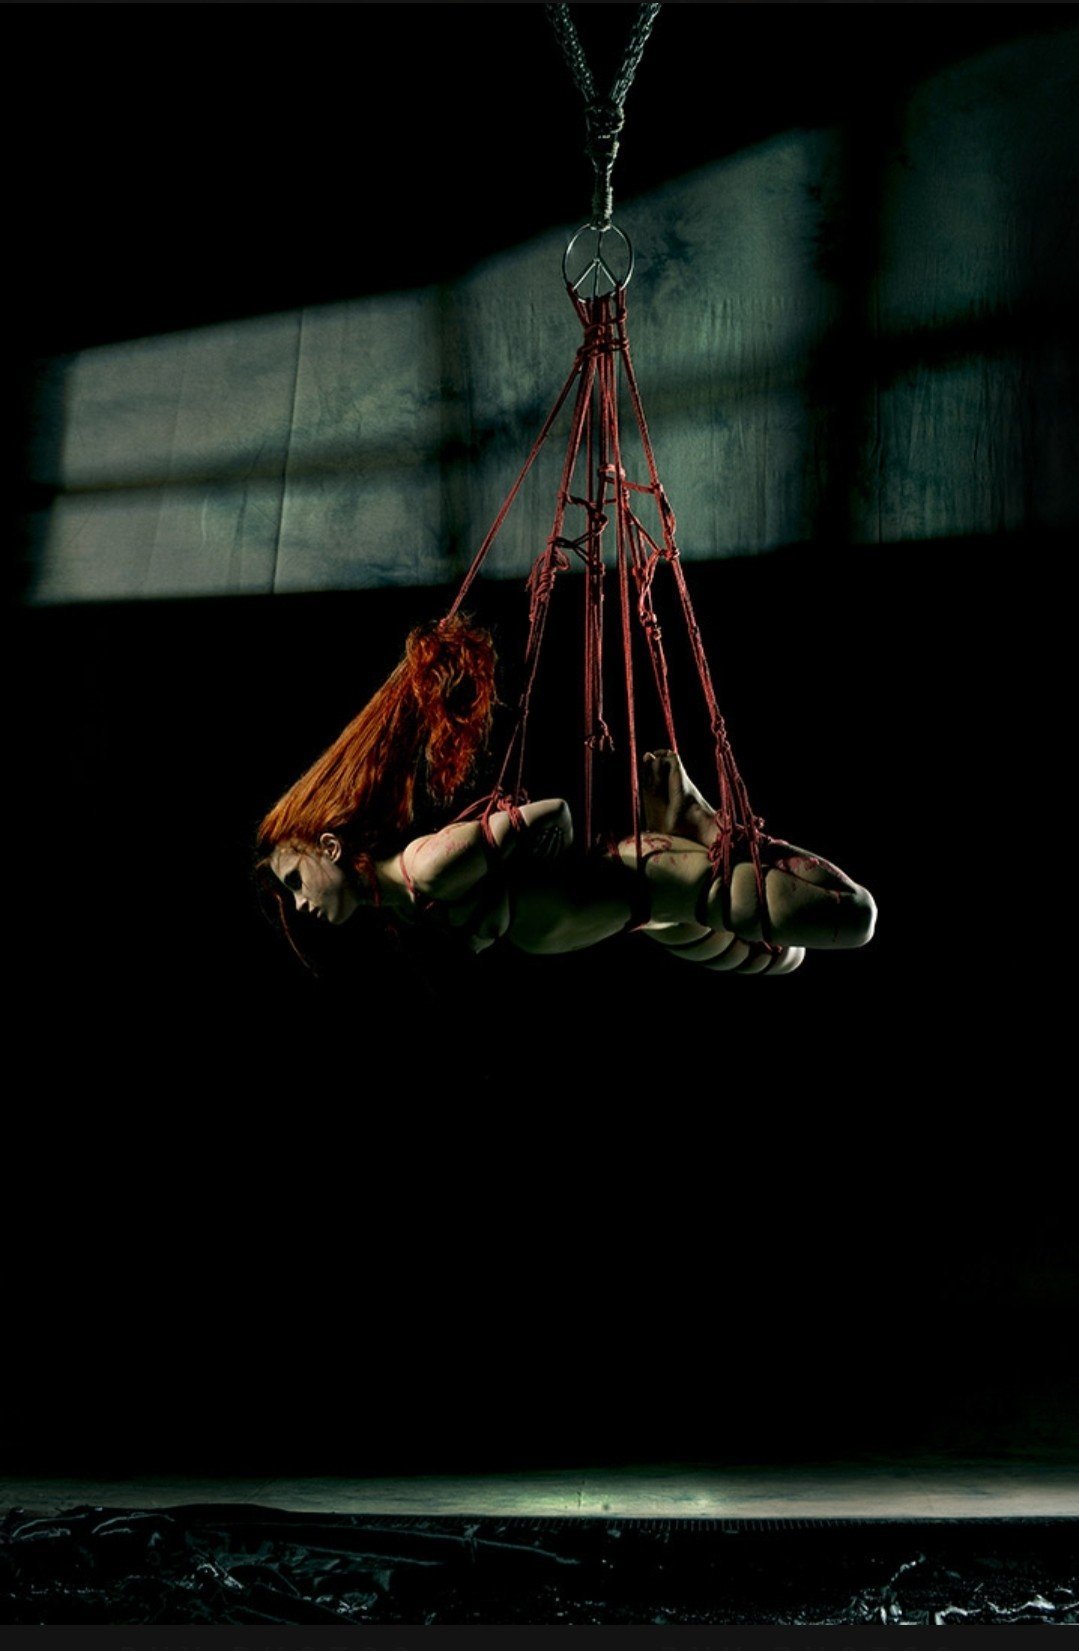 Photo by Sumles with the username @Sumles,  July 9, 2023 at 5:58 AM. The post is about the topic Slavegirl and the text says '#slavegirl #bondage #tied #tiedgirl #shibari #artistic #suspended #femininebeauty #sensual #perfect #fly #ropebunny #submissive #slave #bdsm #longhair #beautiful #beauty #naked #helpless #sub  #puppet #girl #undressed #onherknees #roman #woodhorse..'